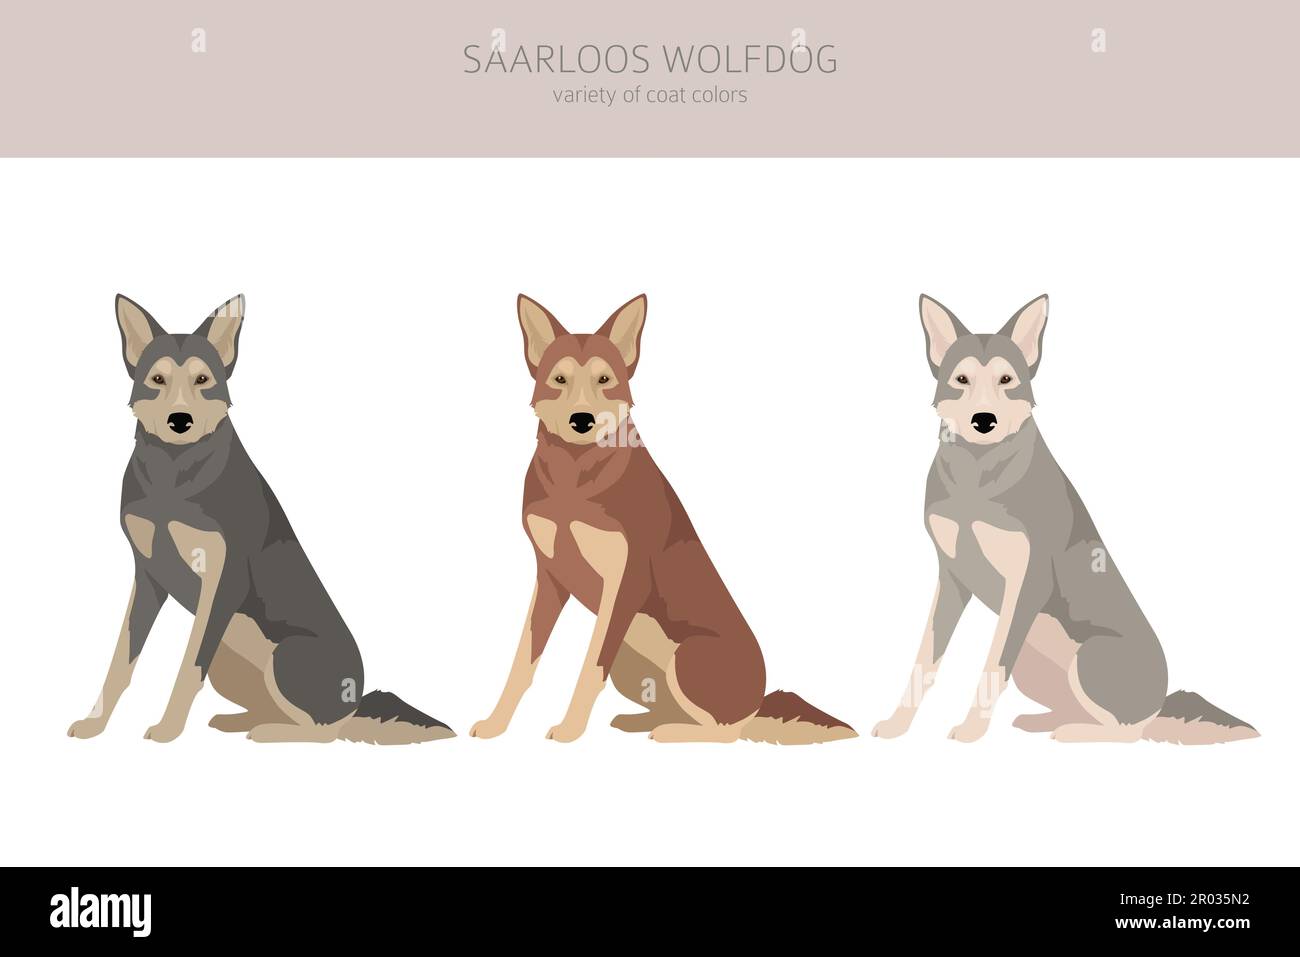 Saarloos Wolfdog clipart. All coat colors set.  All dog breeds characteristics infographic. Vector illustration Stock Vector